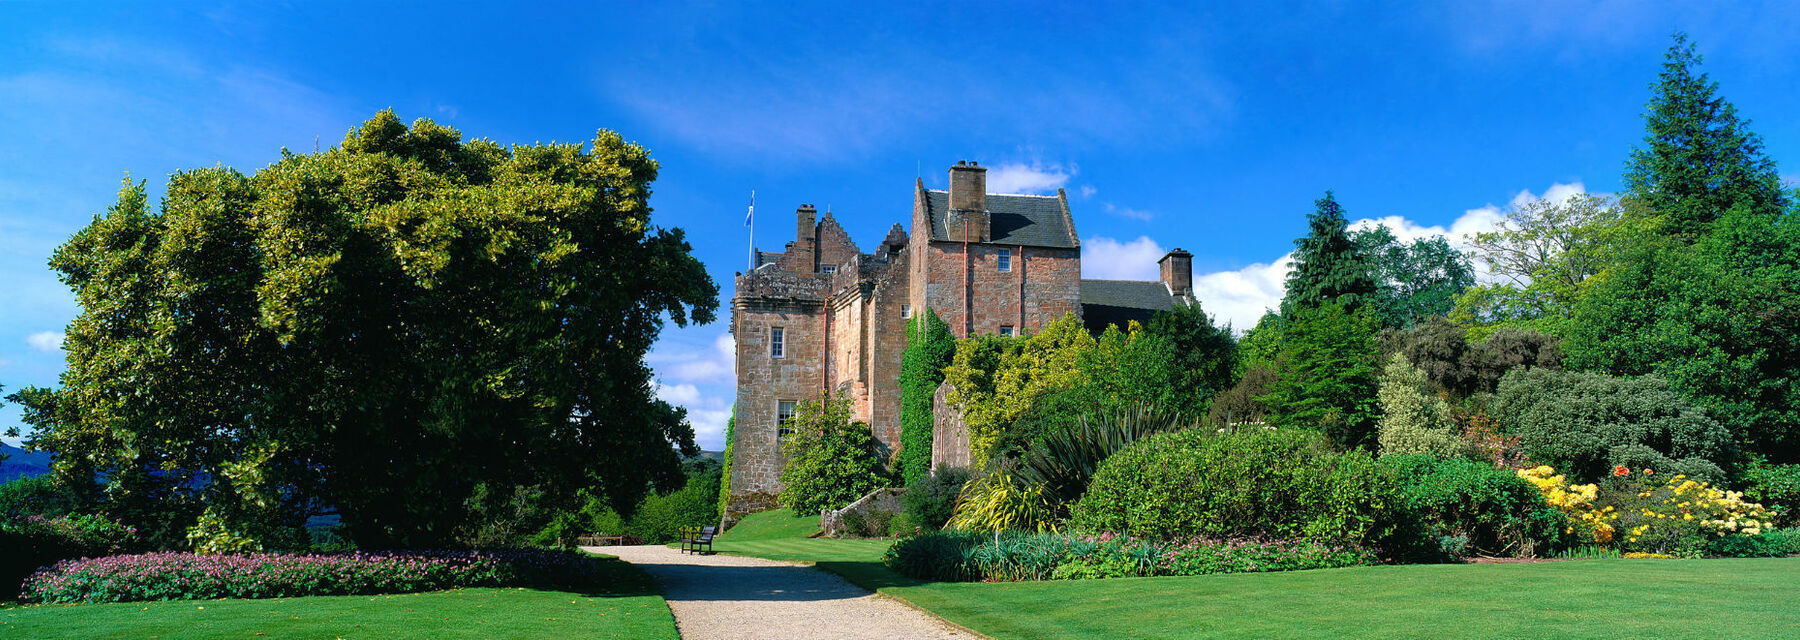 A view of Brodick Castle from the entrance gate, on a bright sunny day with blue sky above. Tall green trees stand either side of the path that leads to the castle. On the right is a bed of established shrubs, many in flower.